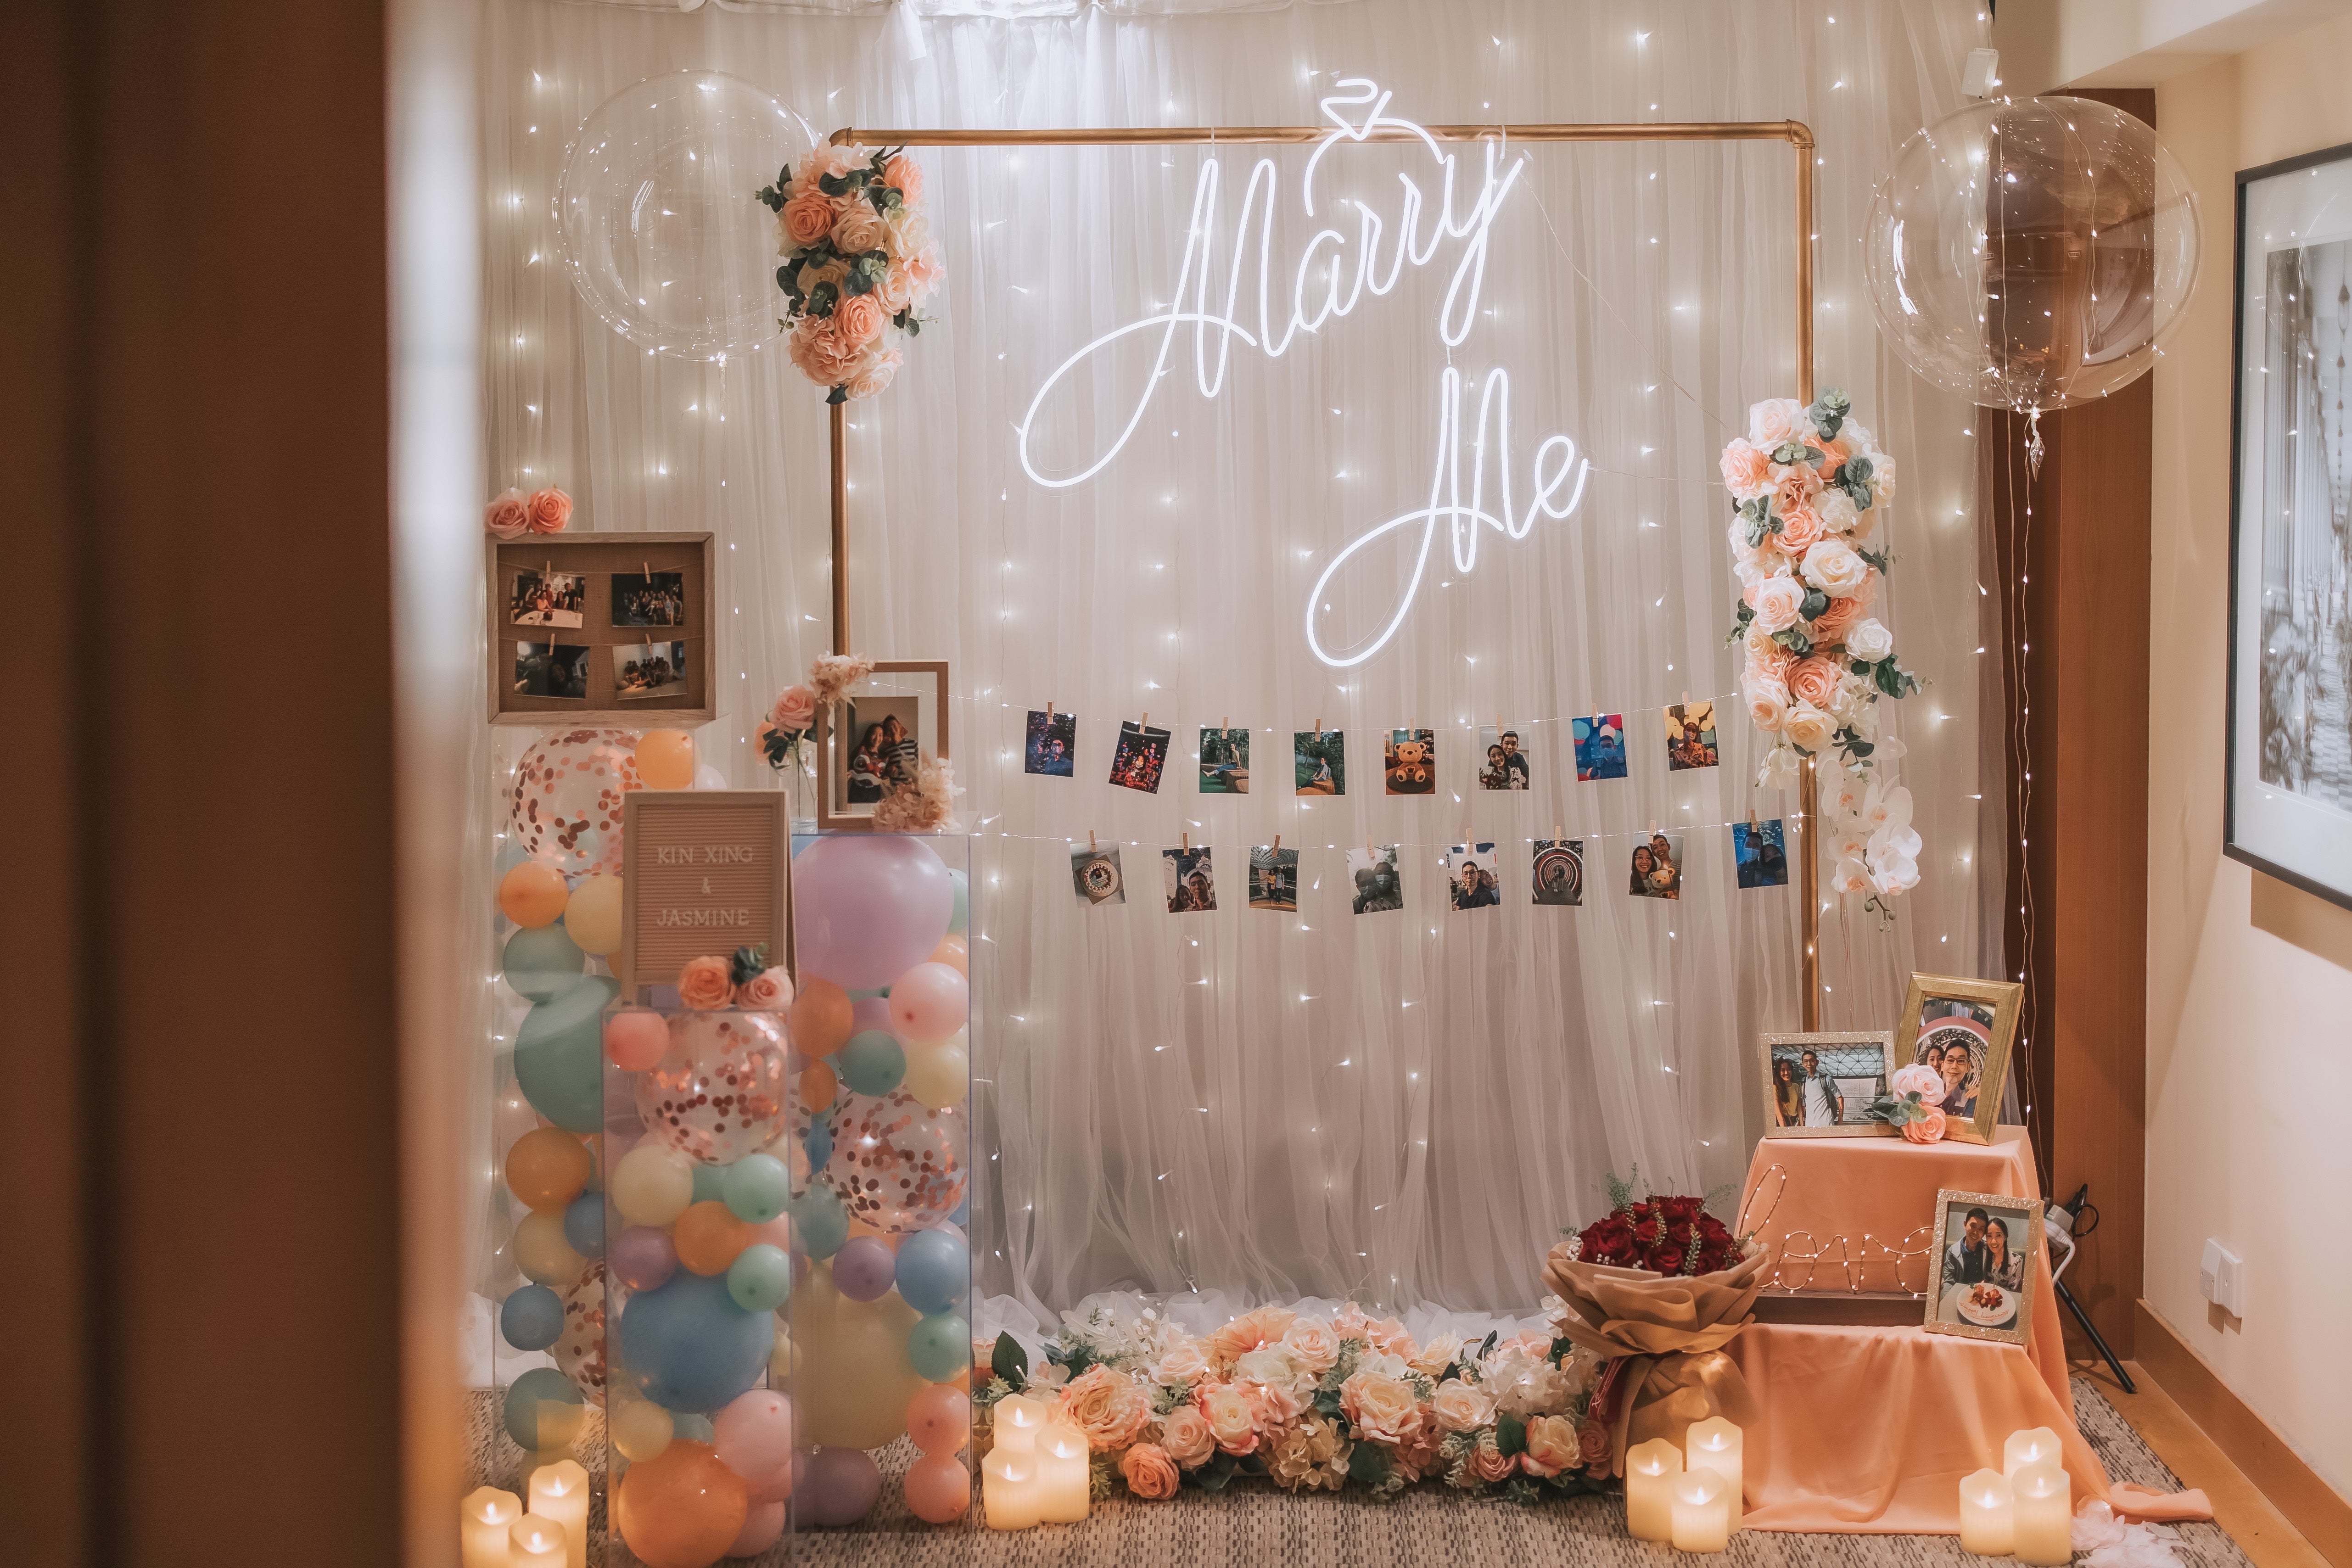 Romantic Hotel Room Proposal Decor in Grand Hyatt Singapore with Fairylight Backdrop, Pastel Balloons, Flowers and Neon Sign by Style It Simply